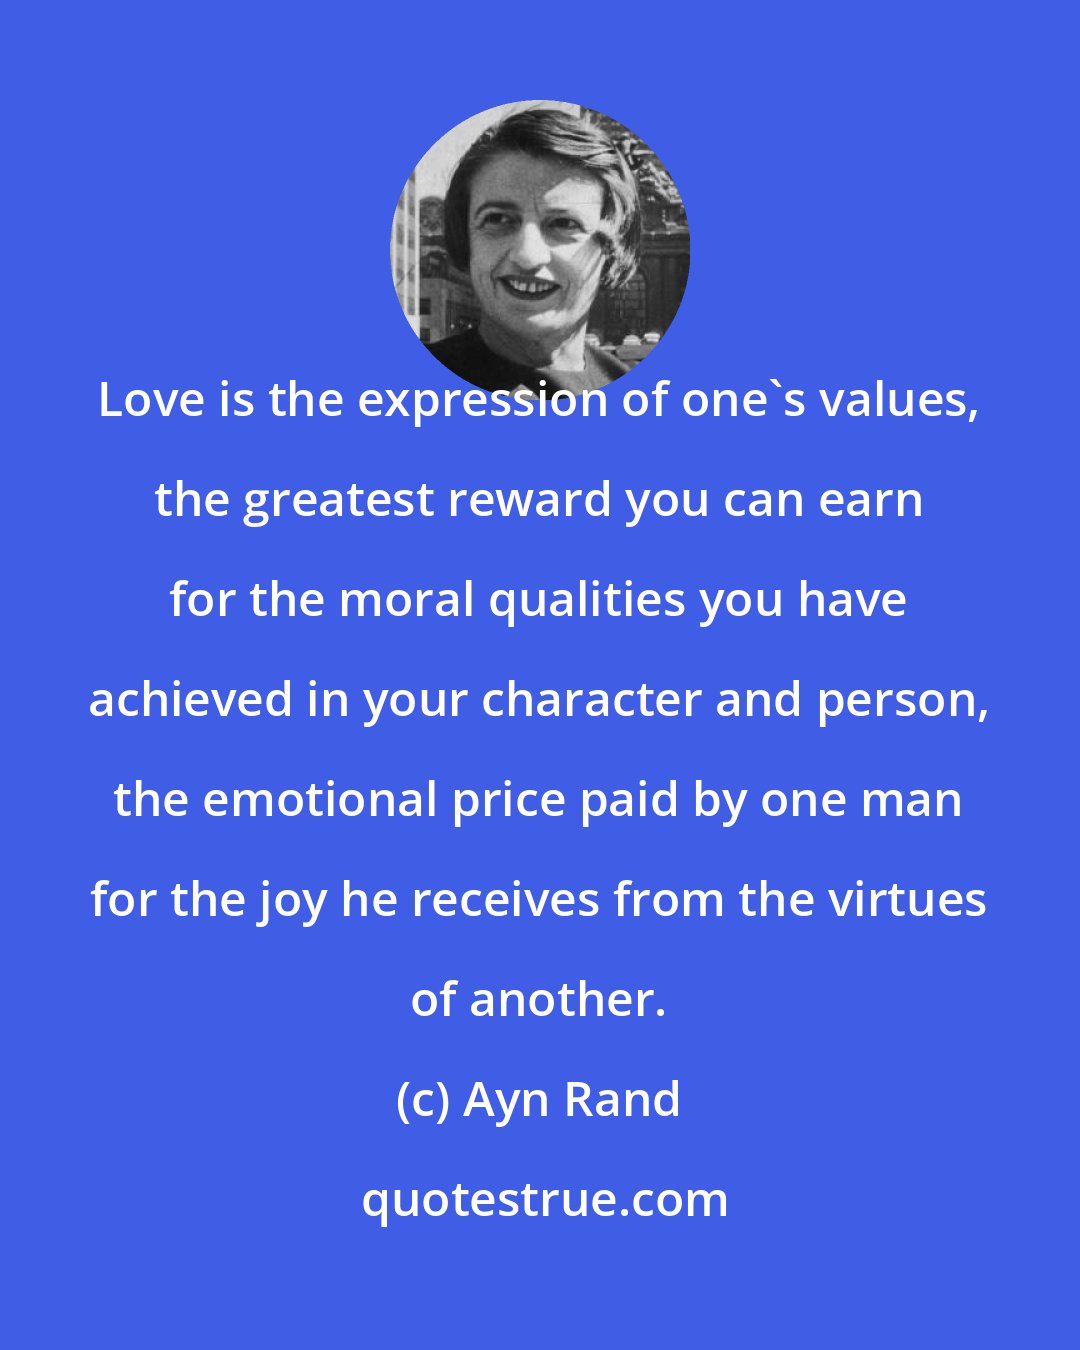 Ayn Rand: Love is the expression of one's values, the greatest reward you can earn for the moral qualities you have achieved in your character and person, the emotional price paid by one man for the joy he receives from the virtues of another.